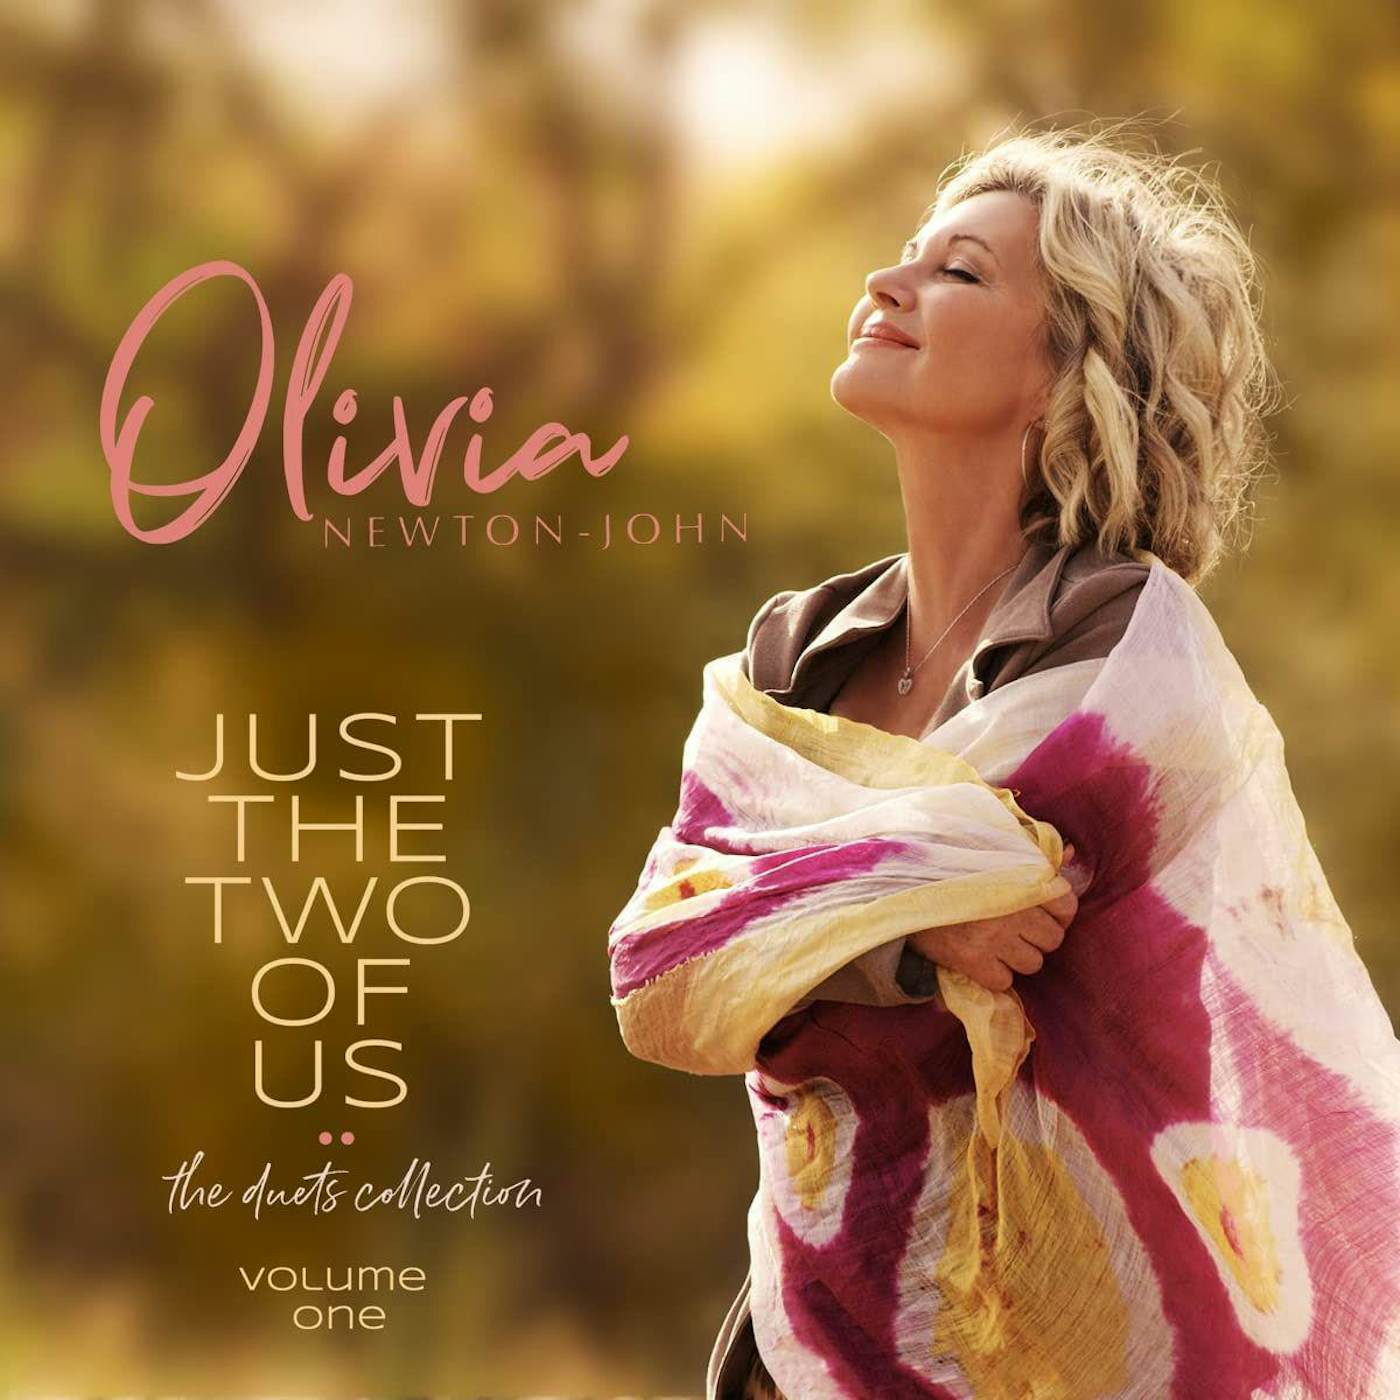 Olivia Newton-John JUST THE TWO OF US: THE DUETS COLLECTION (VOL ONE) Vinyl Record